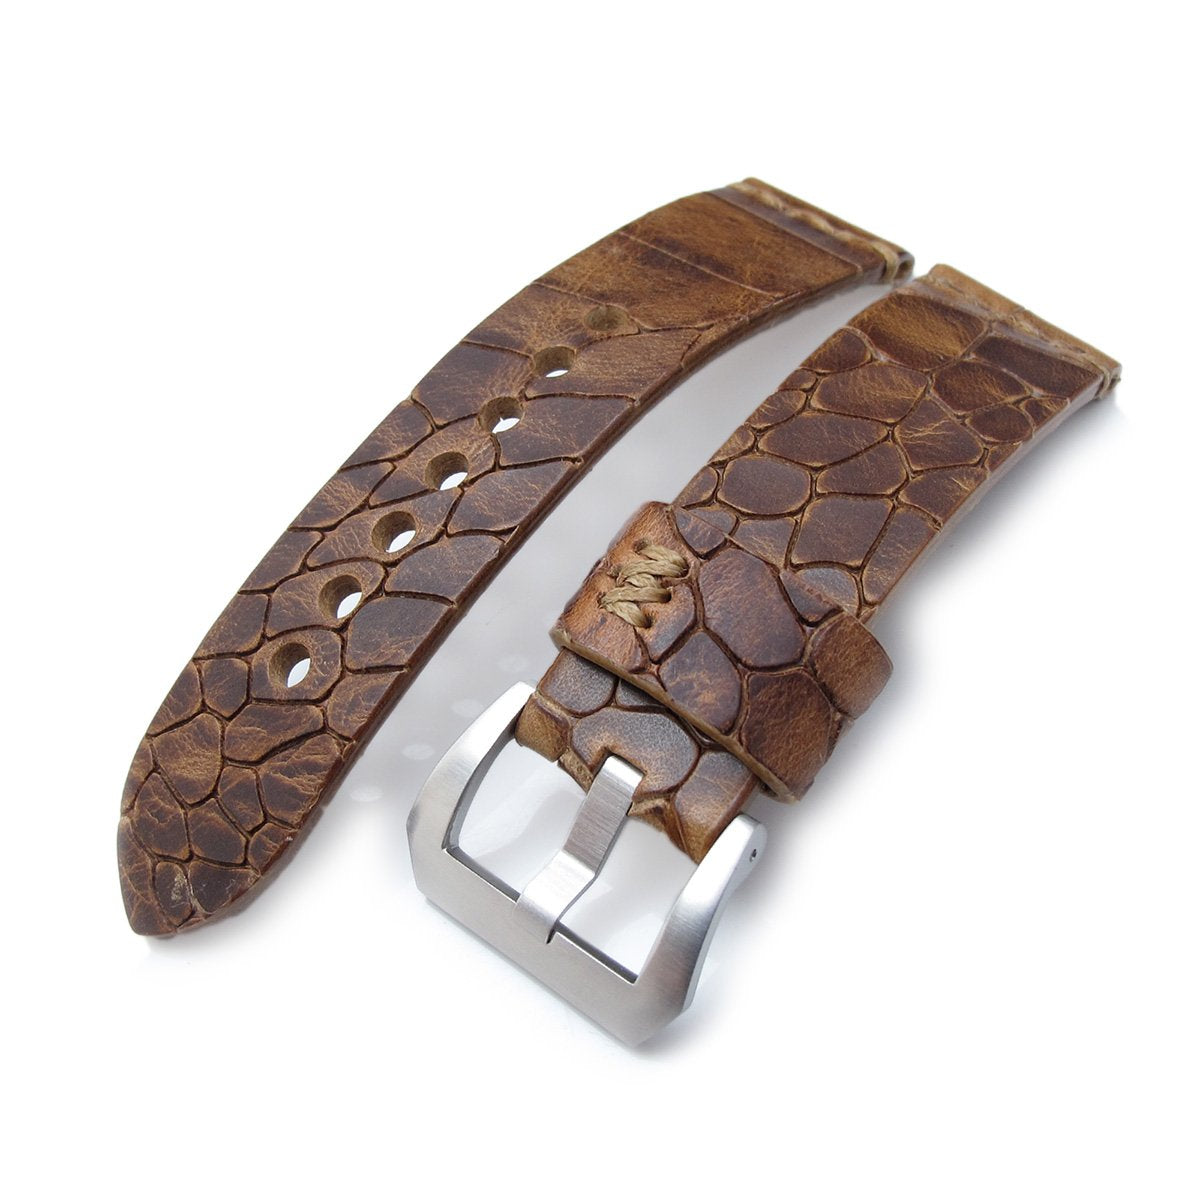 MiLTAT Zizz Collection 24mm Cracked Croco Middle Brown Watch Strap Brown Stitching Strapcode Watch Bands